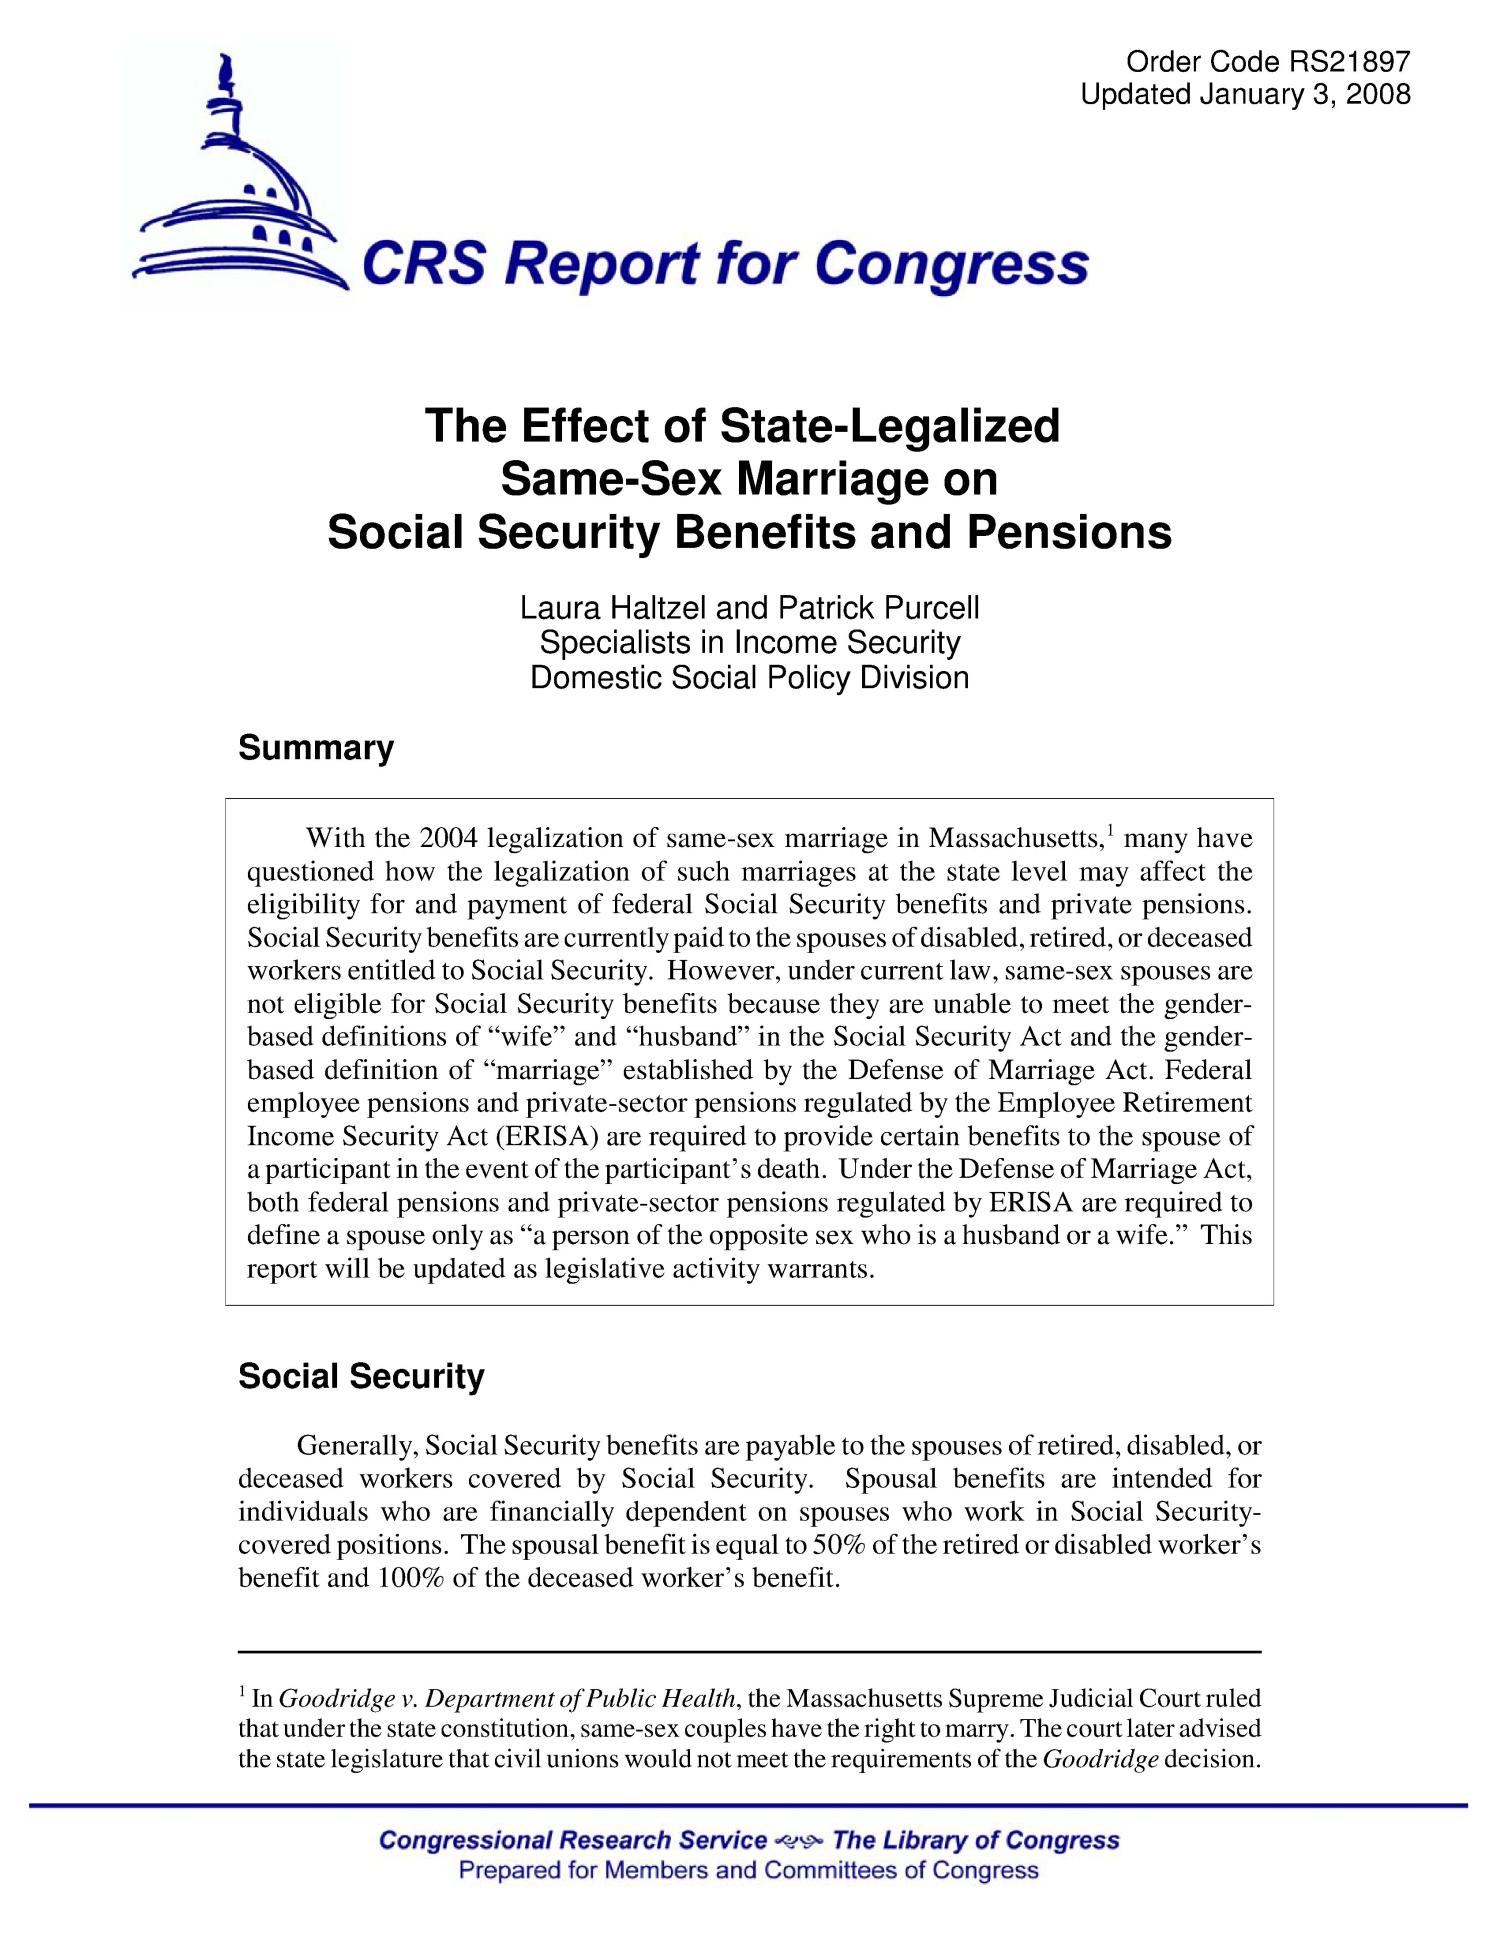 The Effect Of State Legalized Same Sex Marriage On Social Security 3481